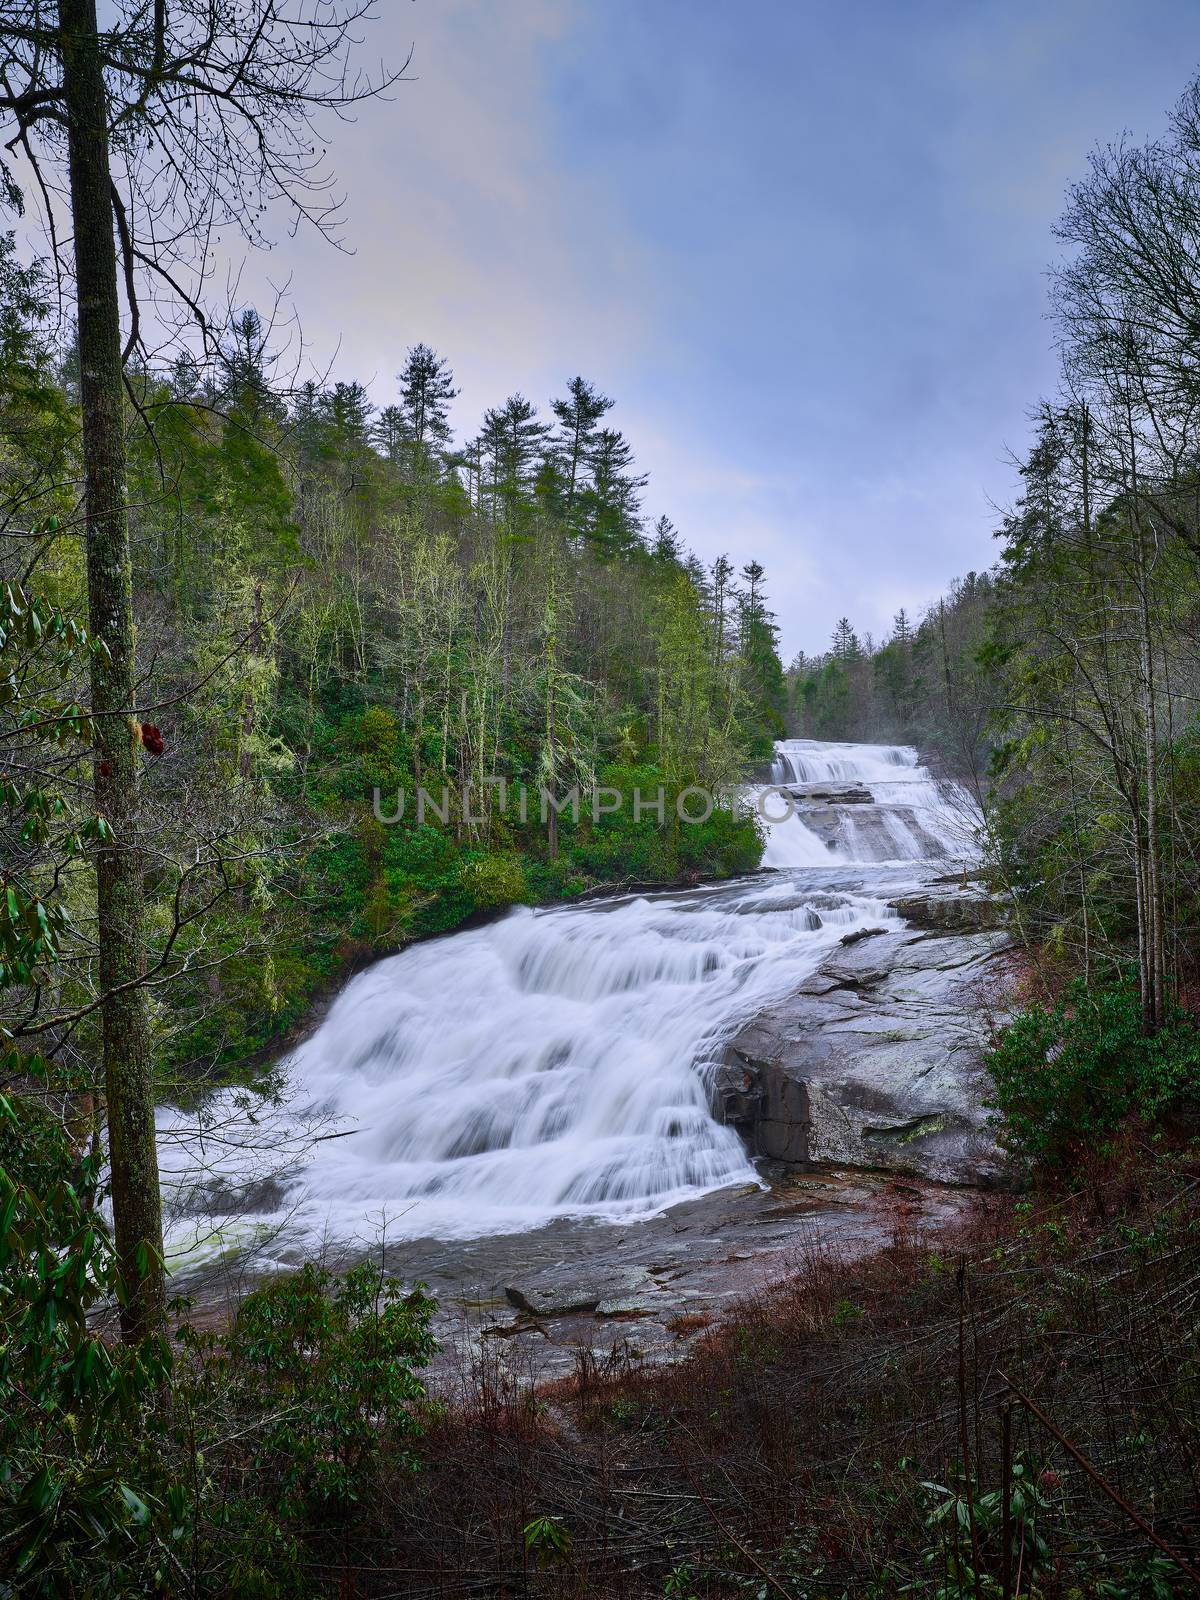 Triple Falls in the Dupont State Forest in North Carolina.